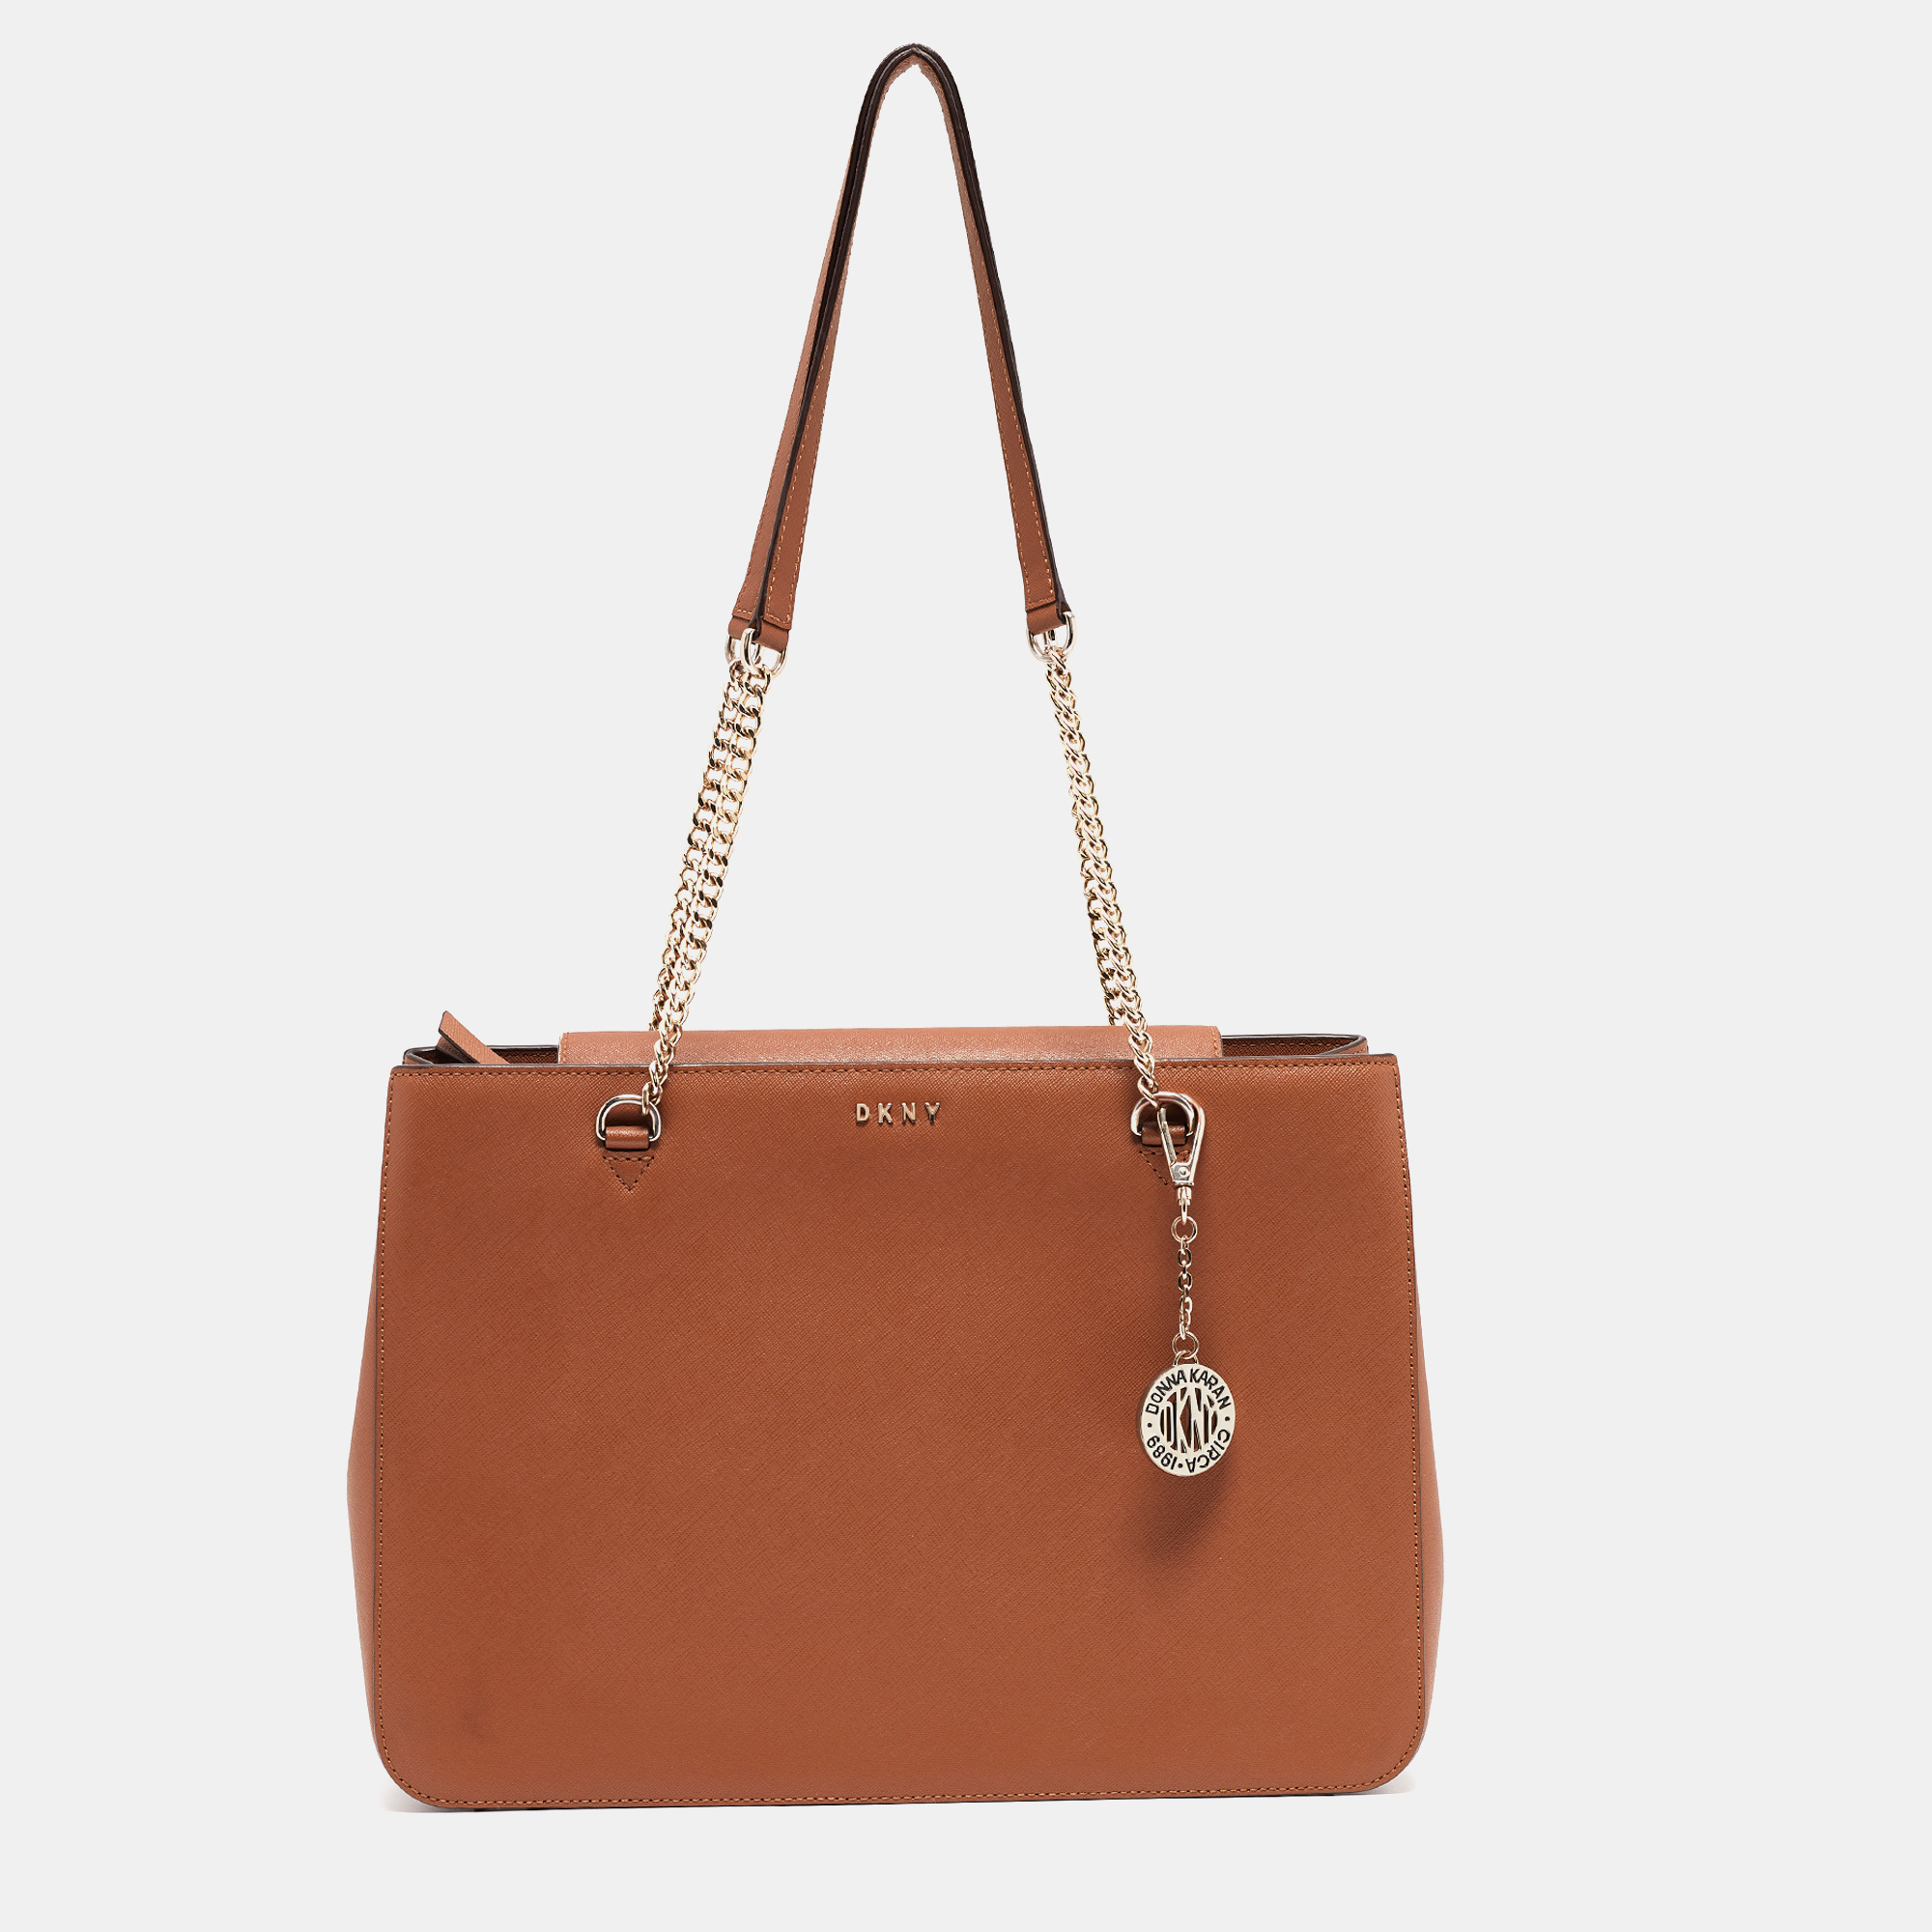 Dkny tan leather bryant park chain tote